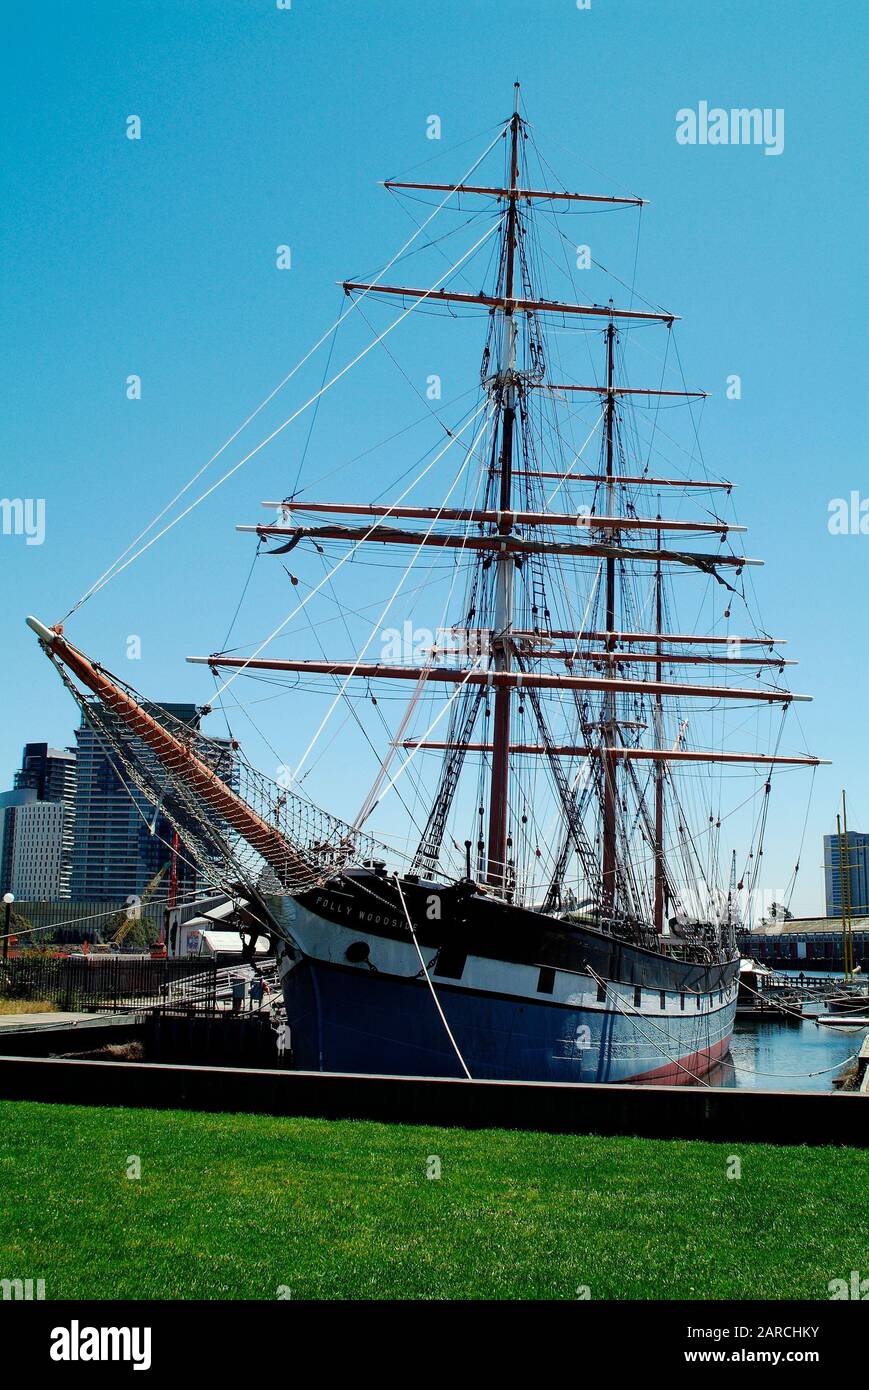 Melbourne, VIC, Australia - November 09, 2006: Vintage sailing ship Polly Woodside used as Maritime Museum, situated on Southbank district on Yarra Ri Stock Photo